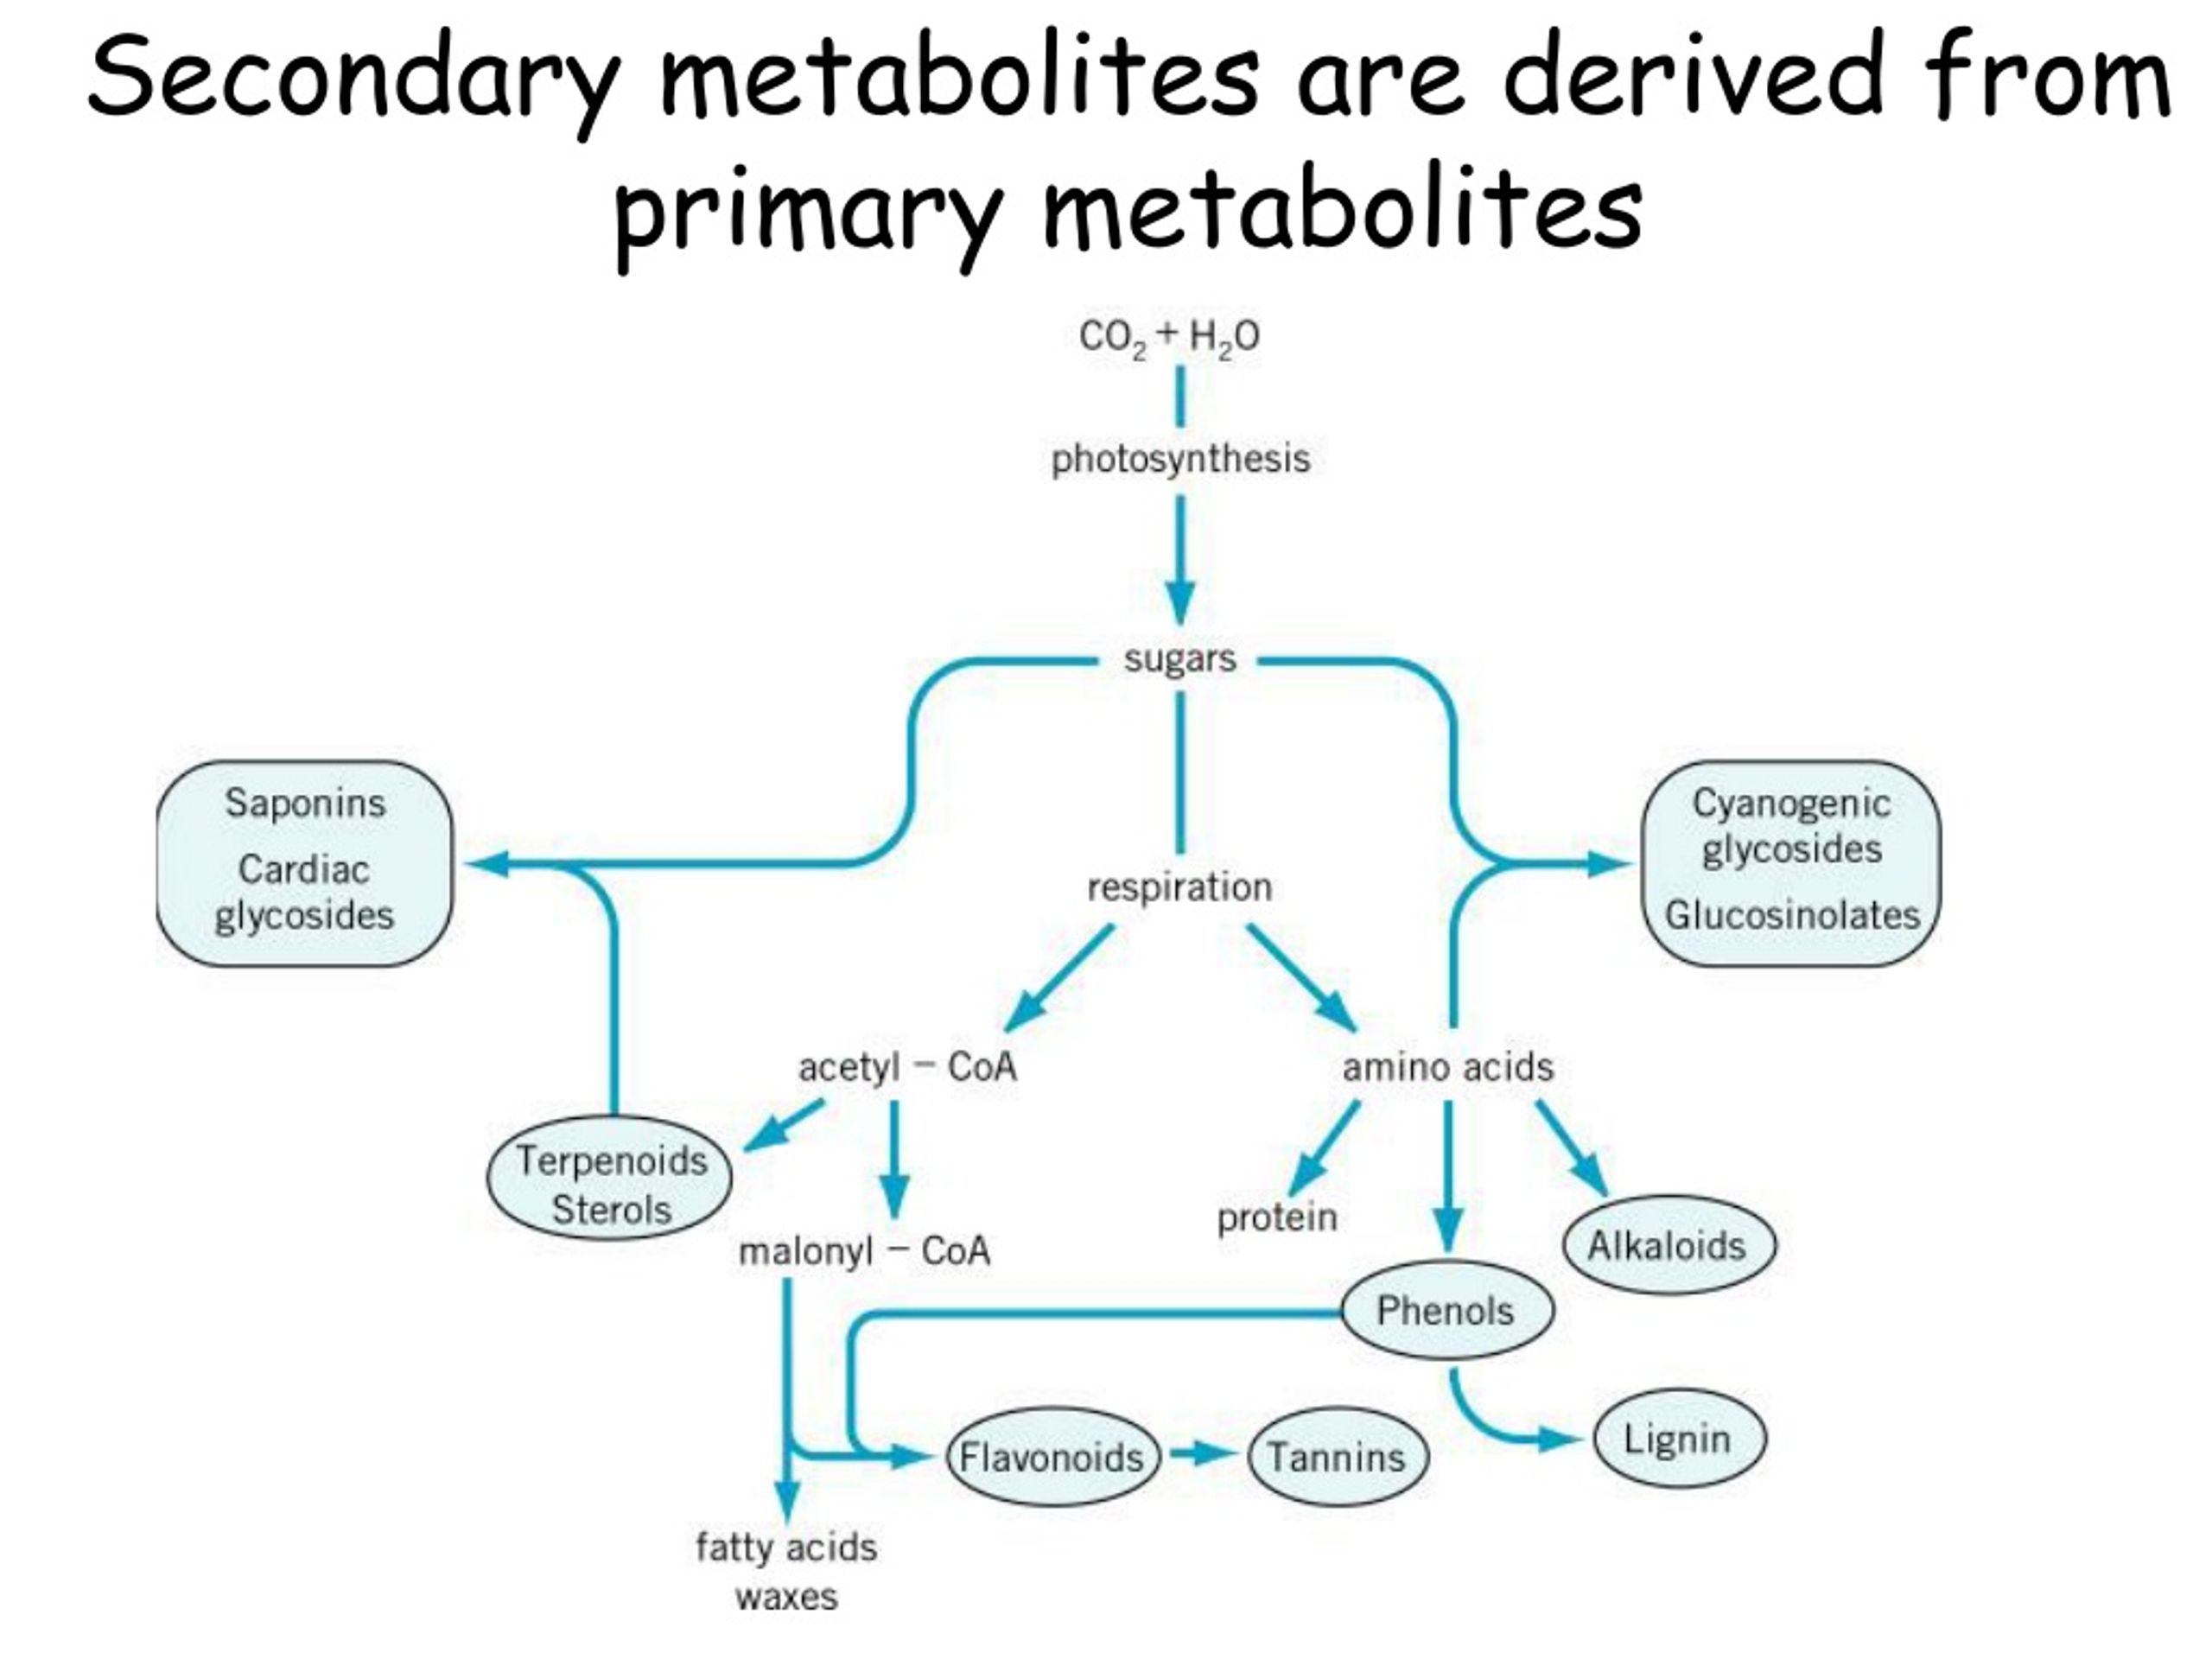 PPT - SeconDary Metabolites Are DeriveD From Primary L